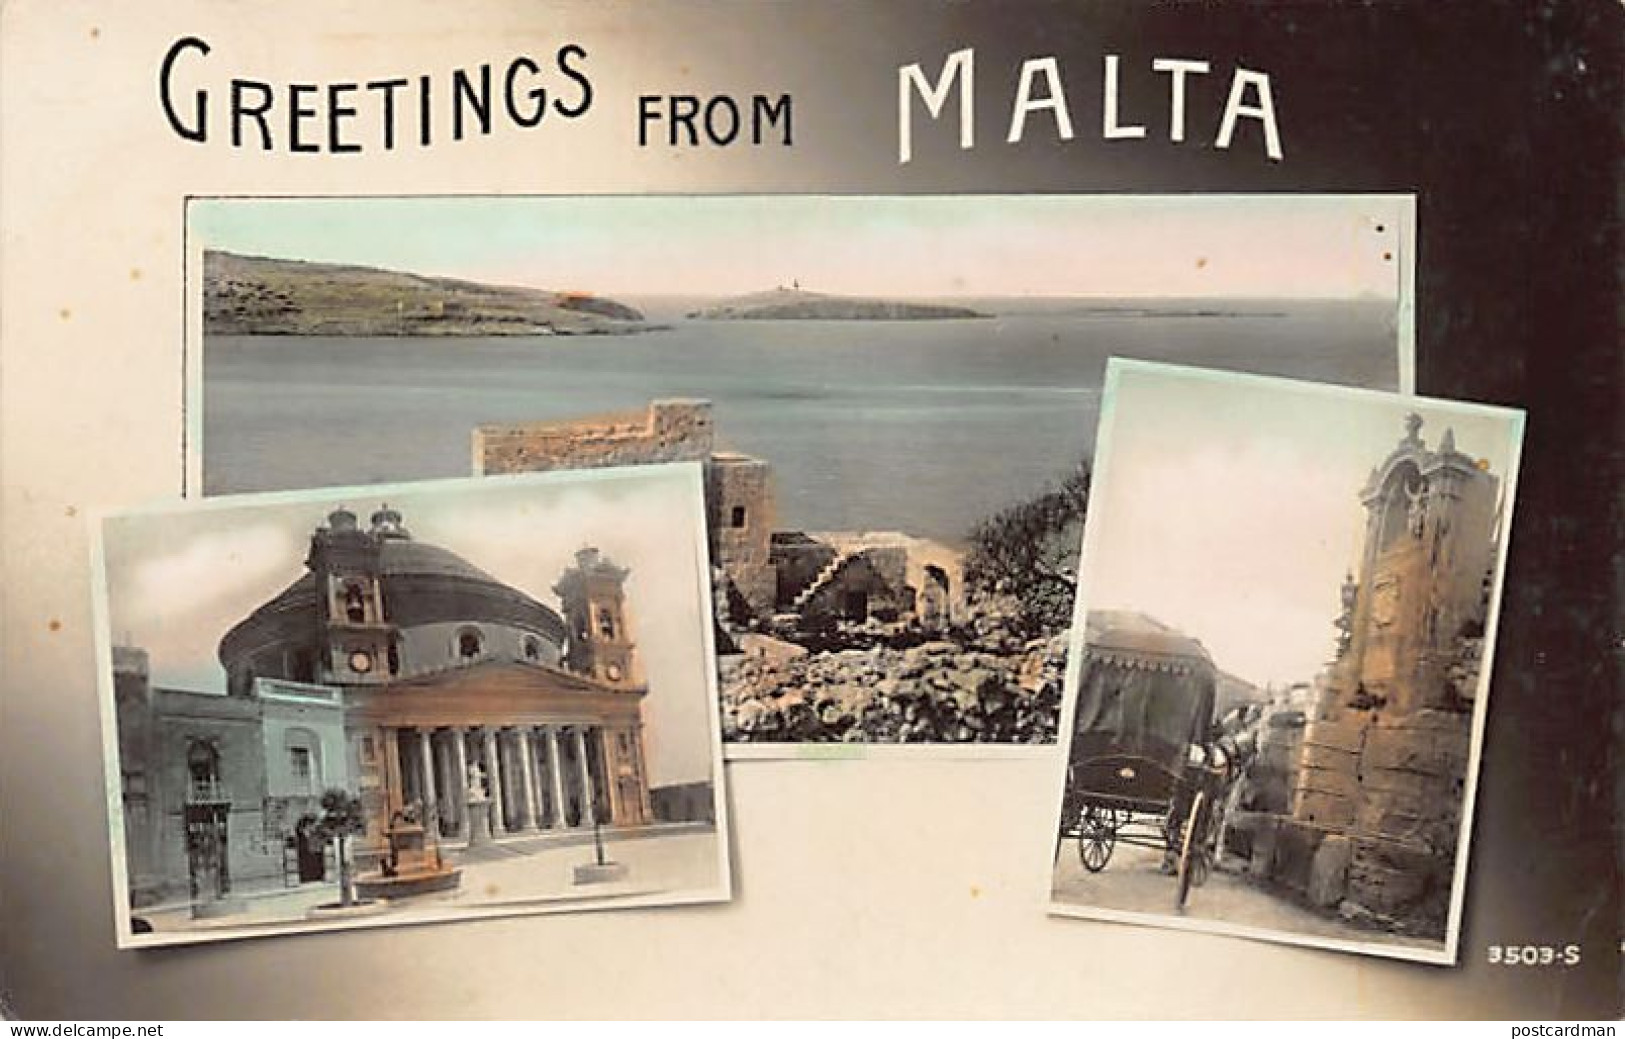 Malta - Greetings From... - Publ. Unknown 3503-S - Malte